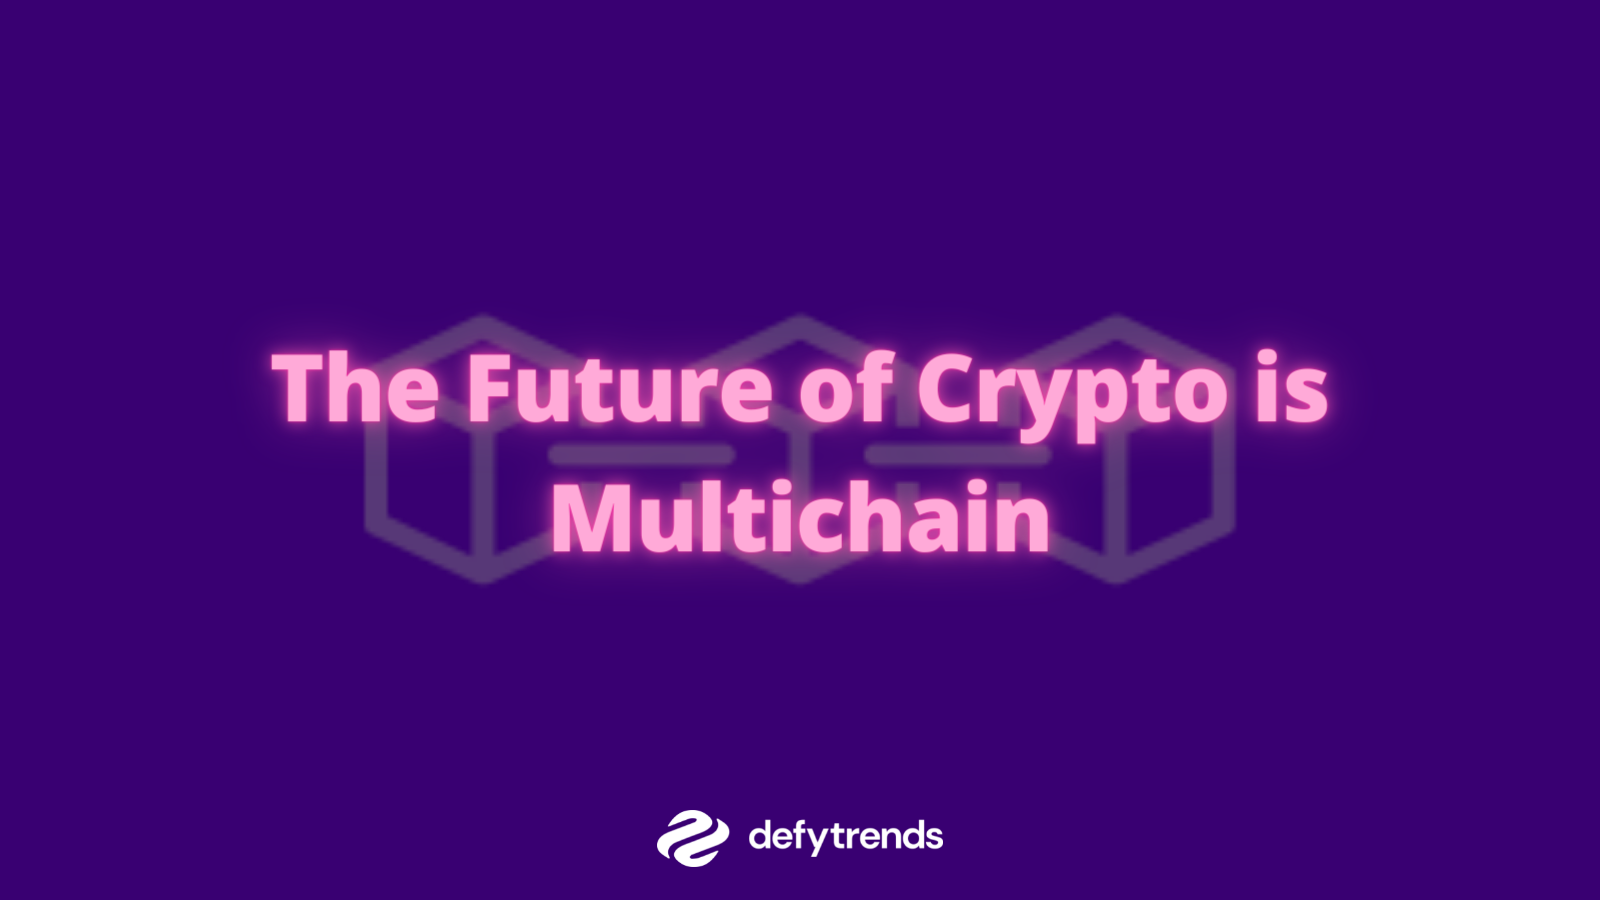 The Future of Crypto is Multichain